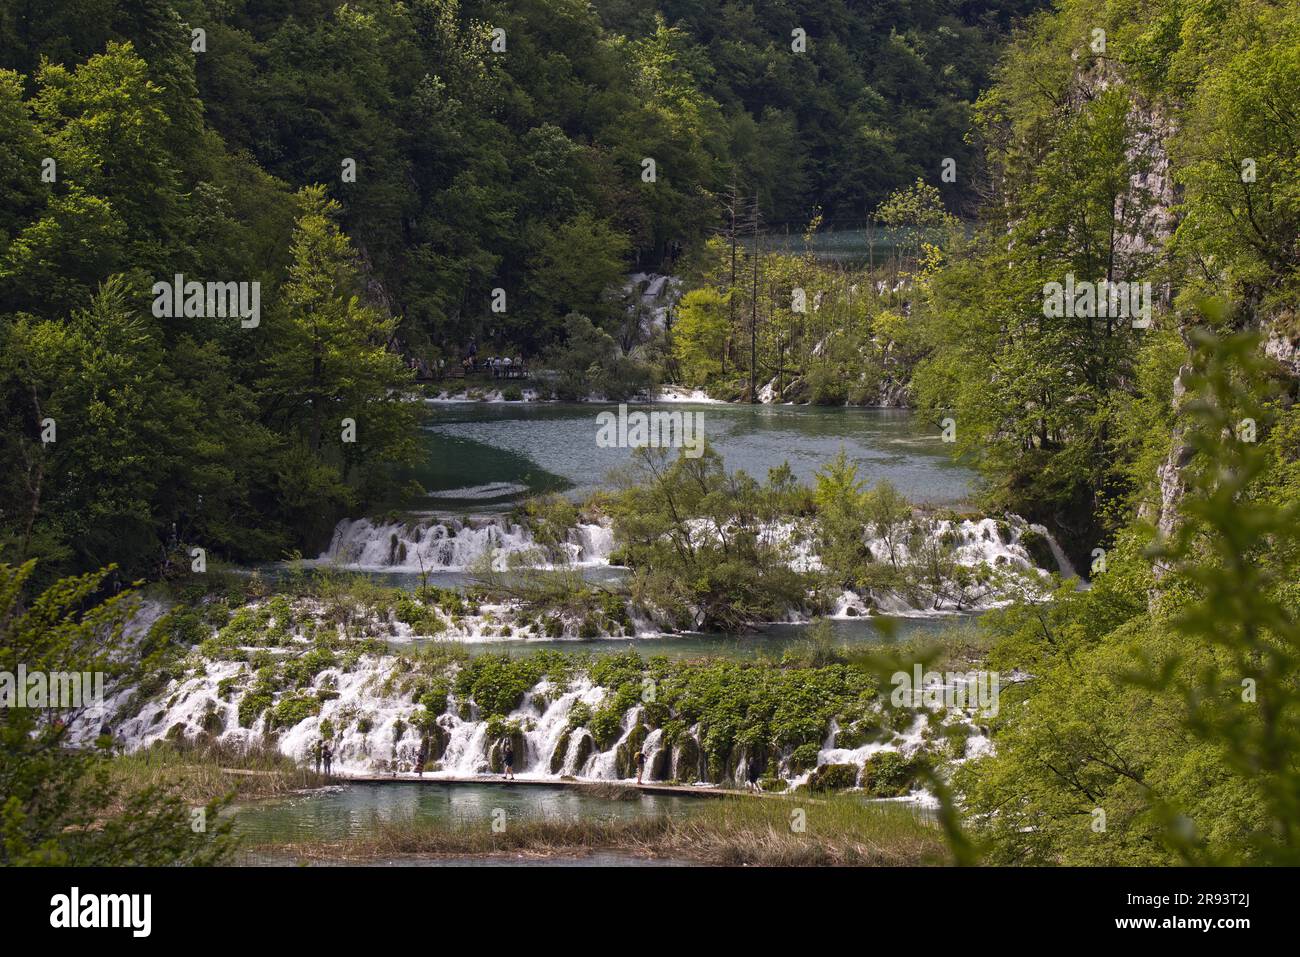 Panoramic view of distant tourists at the Velike Kaskade waterfalls, Plitvice Lakes National Park, Croatia Stock Photo